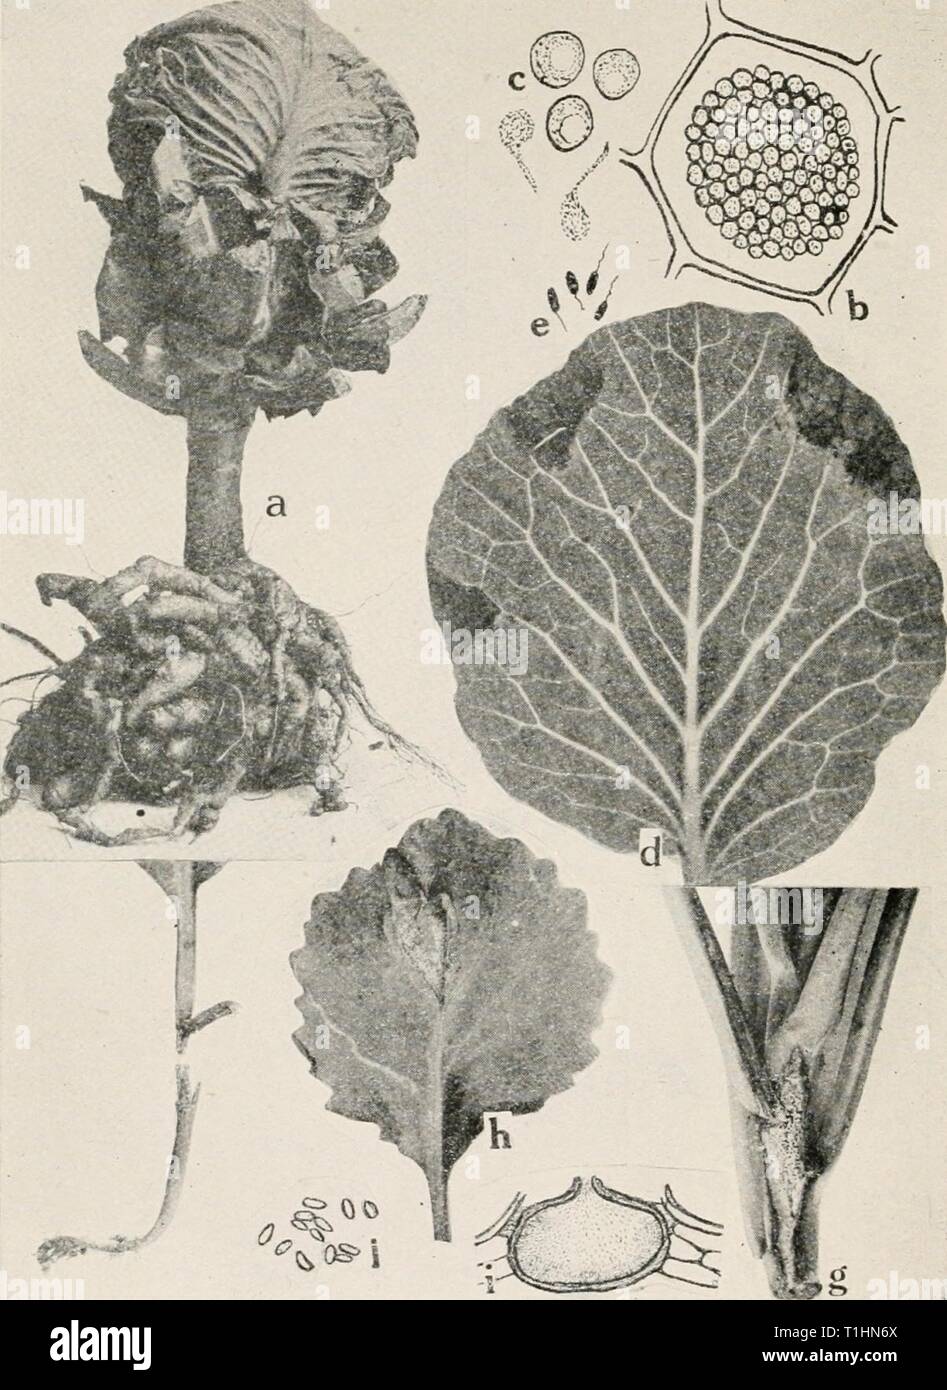 Diseases of truck crops and Diseases of truck crops and their control  diseasesoftruckc00taubuoft Year: [1918]  Fig. 30. Cabbage Diseases. a. Club root (after Cunningham), b. cell filled with spores of the club root or- ganism, c. spores and swarm spores of Plasmodiophora brassica (b. and c. after Chuff), d. black rot of cabbage (after F. C. Stewart), c. individual black rot germs of Pseudomonas campeslris, f. black-leg on young cabbage seedling, g. black-leg lesion on foot of older cabbage plant, h. black-leg lesion on cabbage leaf, i. pycnidium of Phoma oleracecE.j. pycnospores of P. olcrace Stock Photo